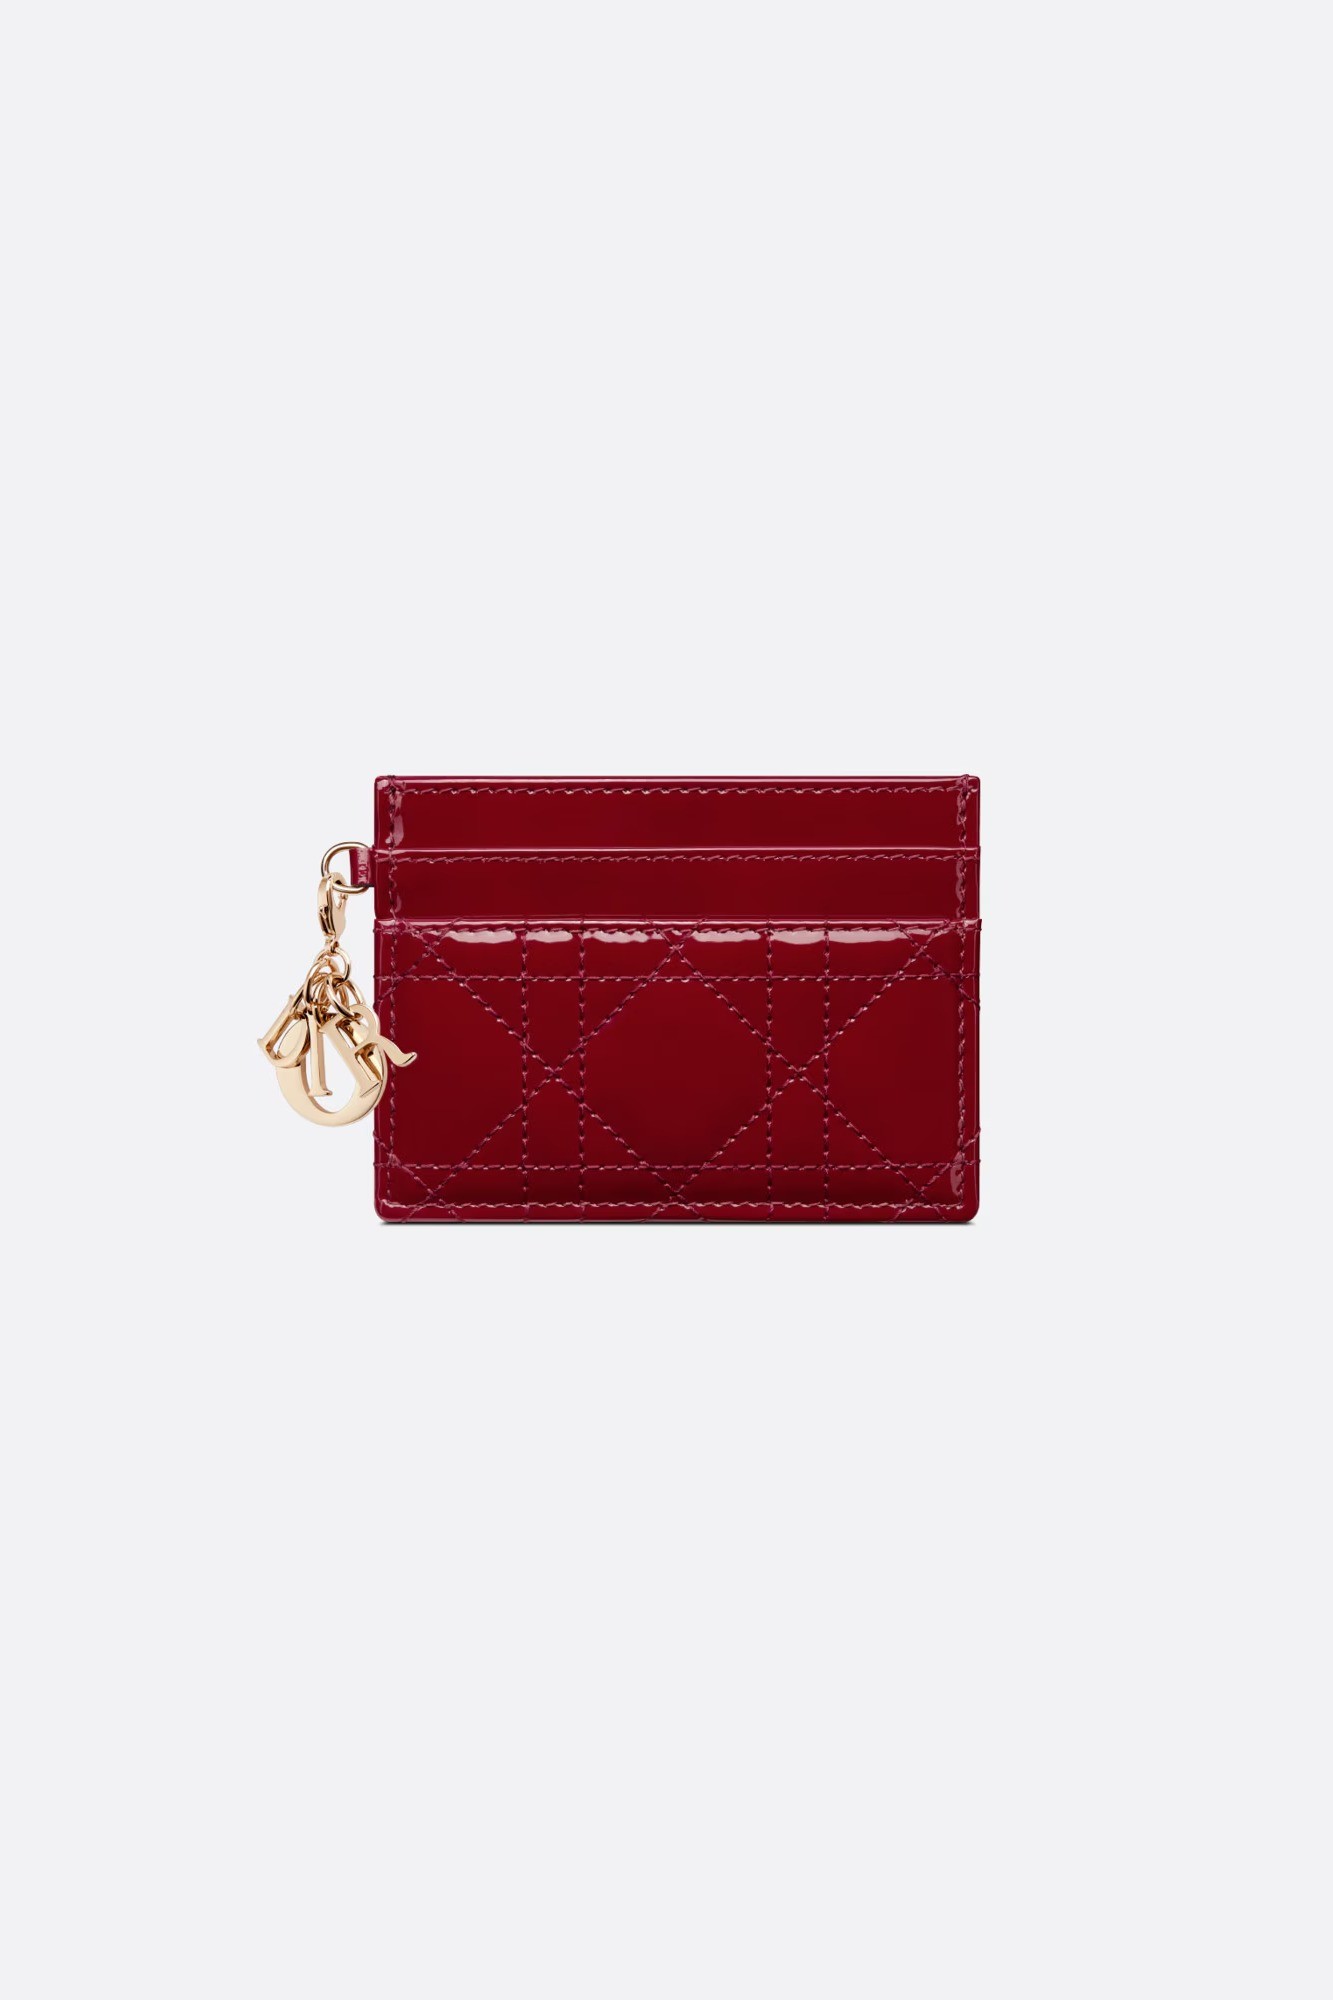 Lady Dior Freesia Card Holder - Cherry Red